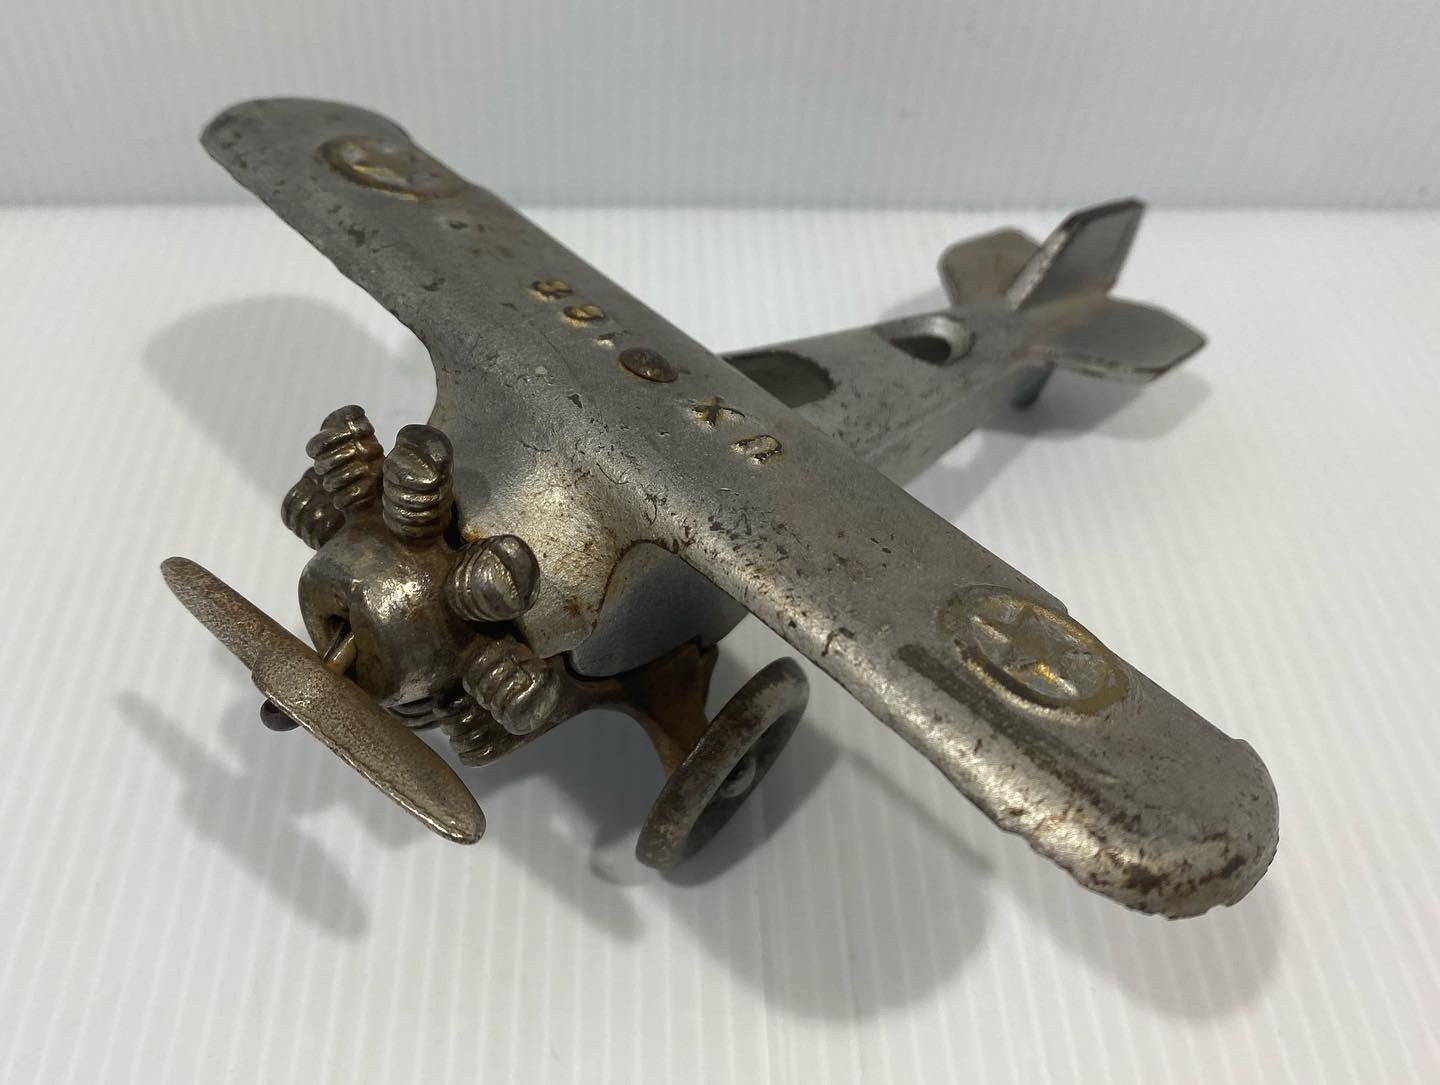 Antique 1920s A.C. Williams cast iron  UX166 Airplane. Very nice all original condition. No cracks or breaks. Excellent.